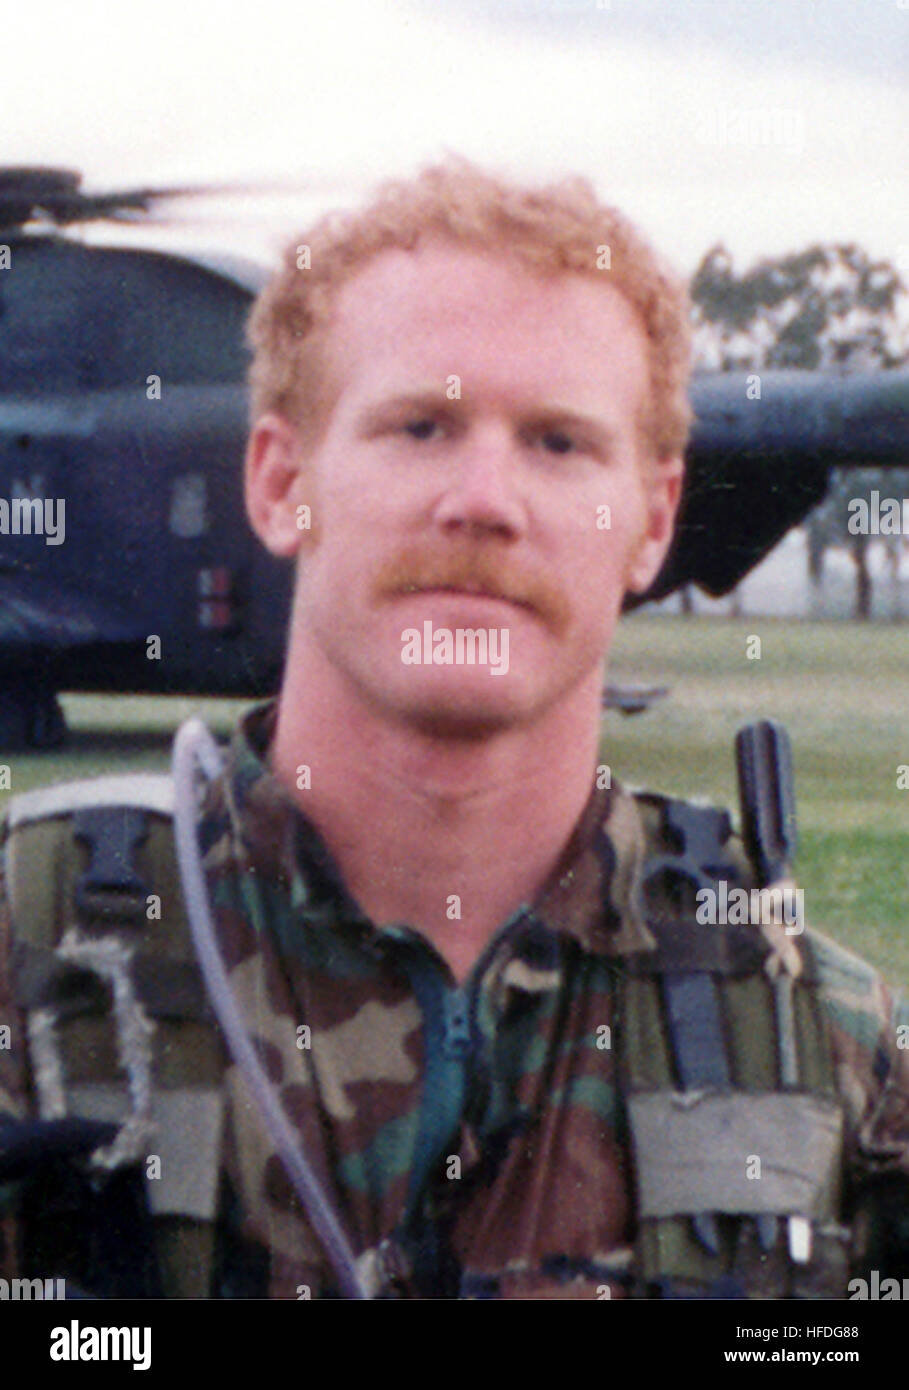 020307-N-0000X-001 Candid photo of special warfare U.S. Navy SEAL (Sea, Air, Land) Aviation Boatswain's Mate- Aircraft Handler, Petty Officer 1st Class Neil Roberts, 32, Woodland, California, showing Petty Officer Roberts during his naval service.  Petty Officer Roberts was killed during a combat mission in support of Operation Anaconda in Eastern Afghanistan, on March 2nd, 2002.  Photograph provided to the U. S. Navy by service members immediate family.  (RELEASED) US Navy 020307-N-0000X-001 ABH1 Neil Roberts - SEAL killed in Afghanistan Stock Photo